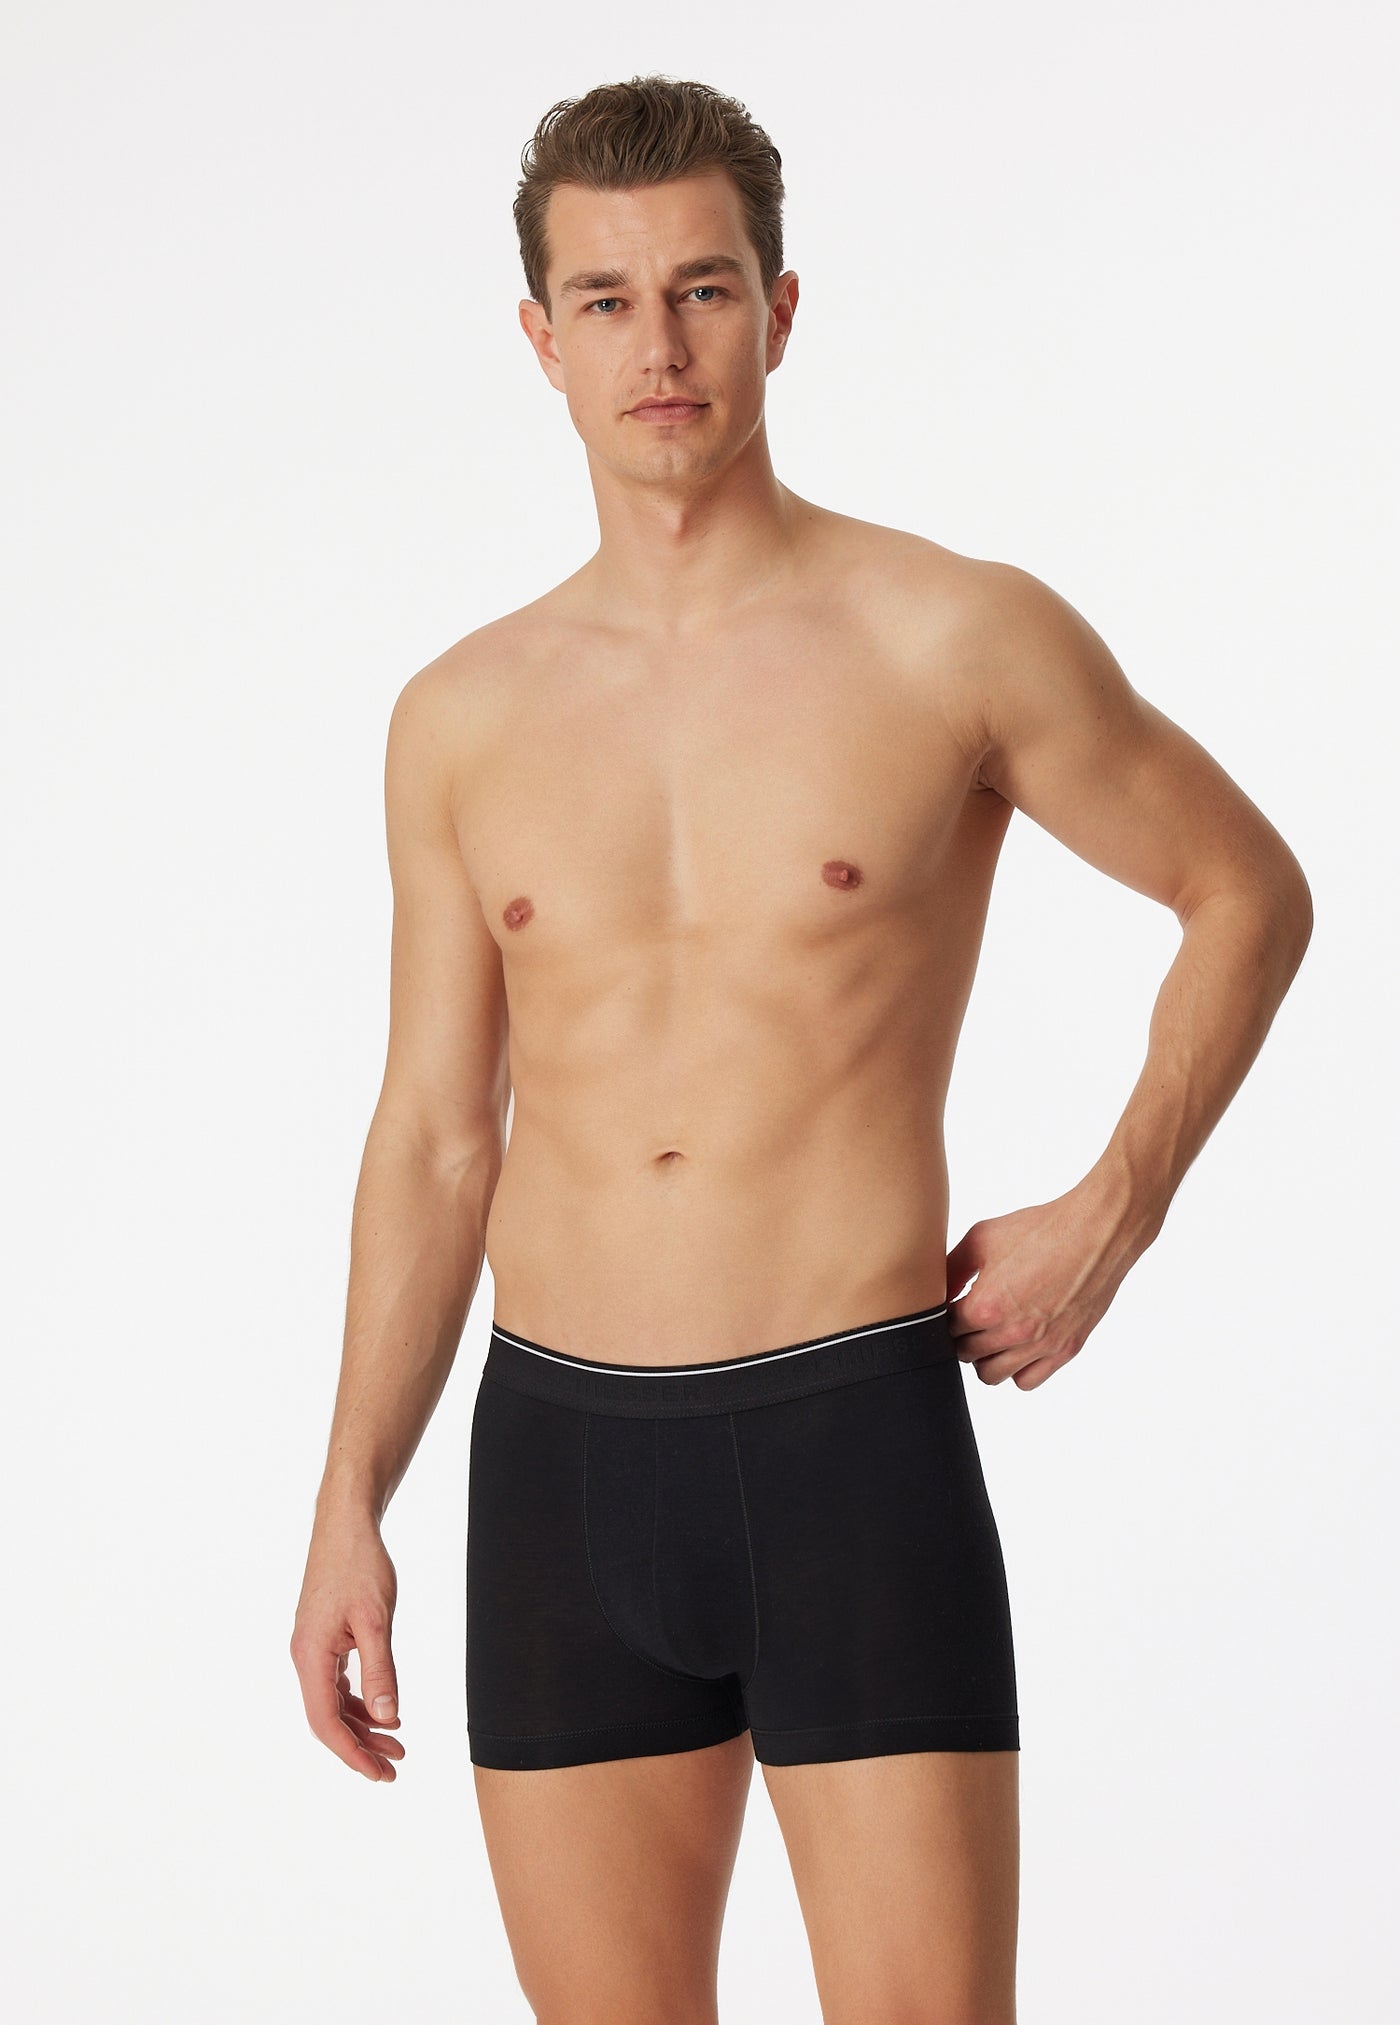 Schiesser - Personal Fit - Shorts